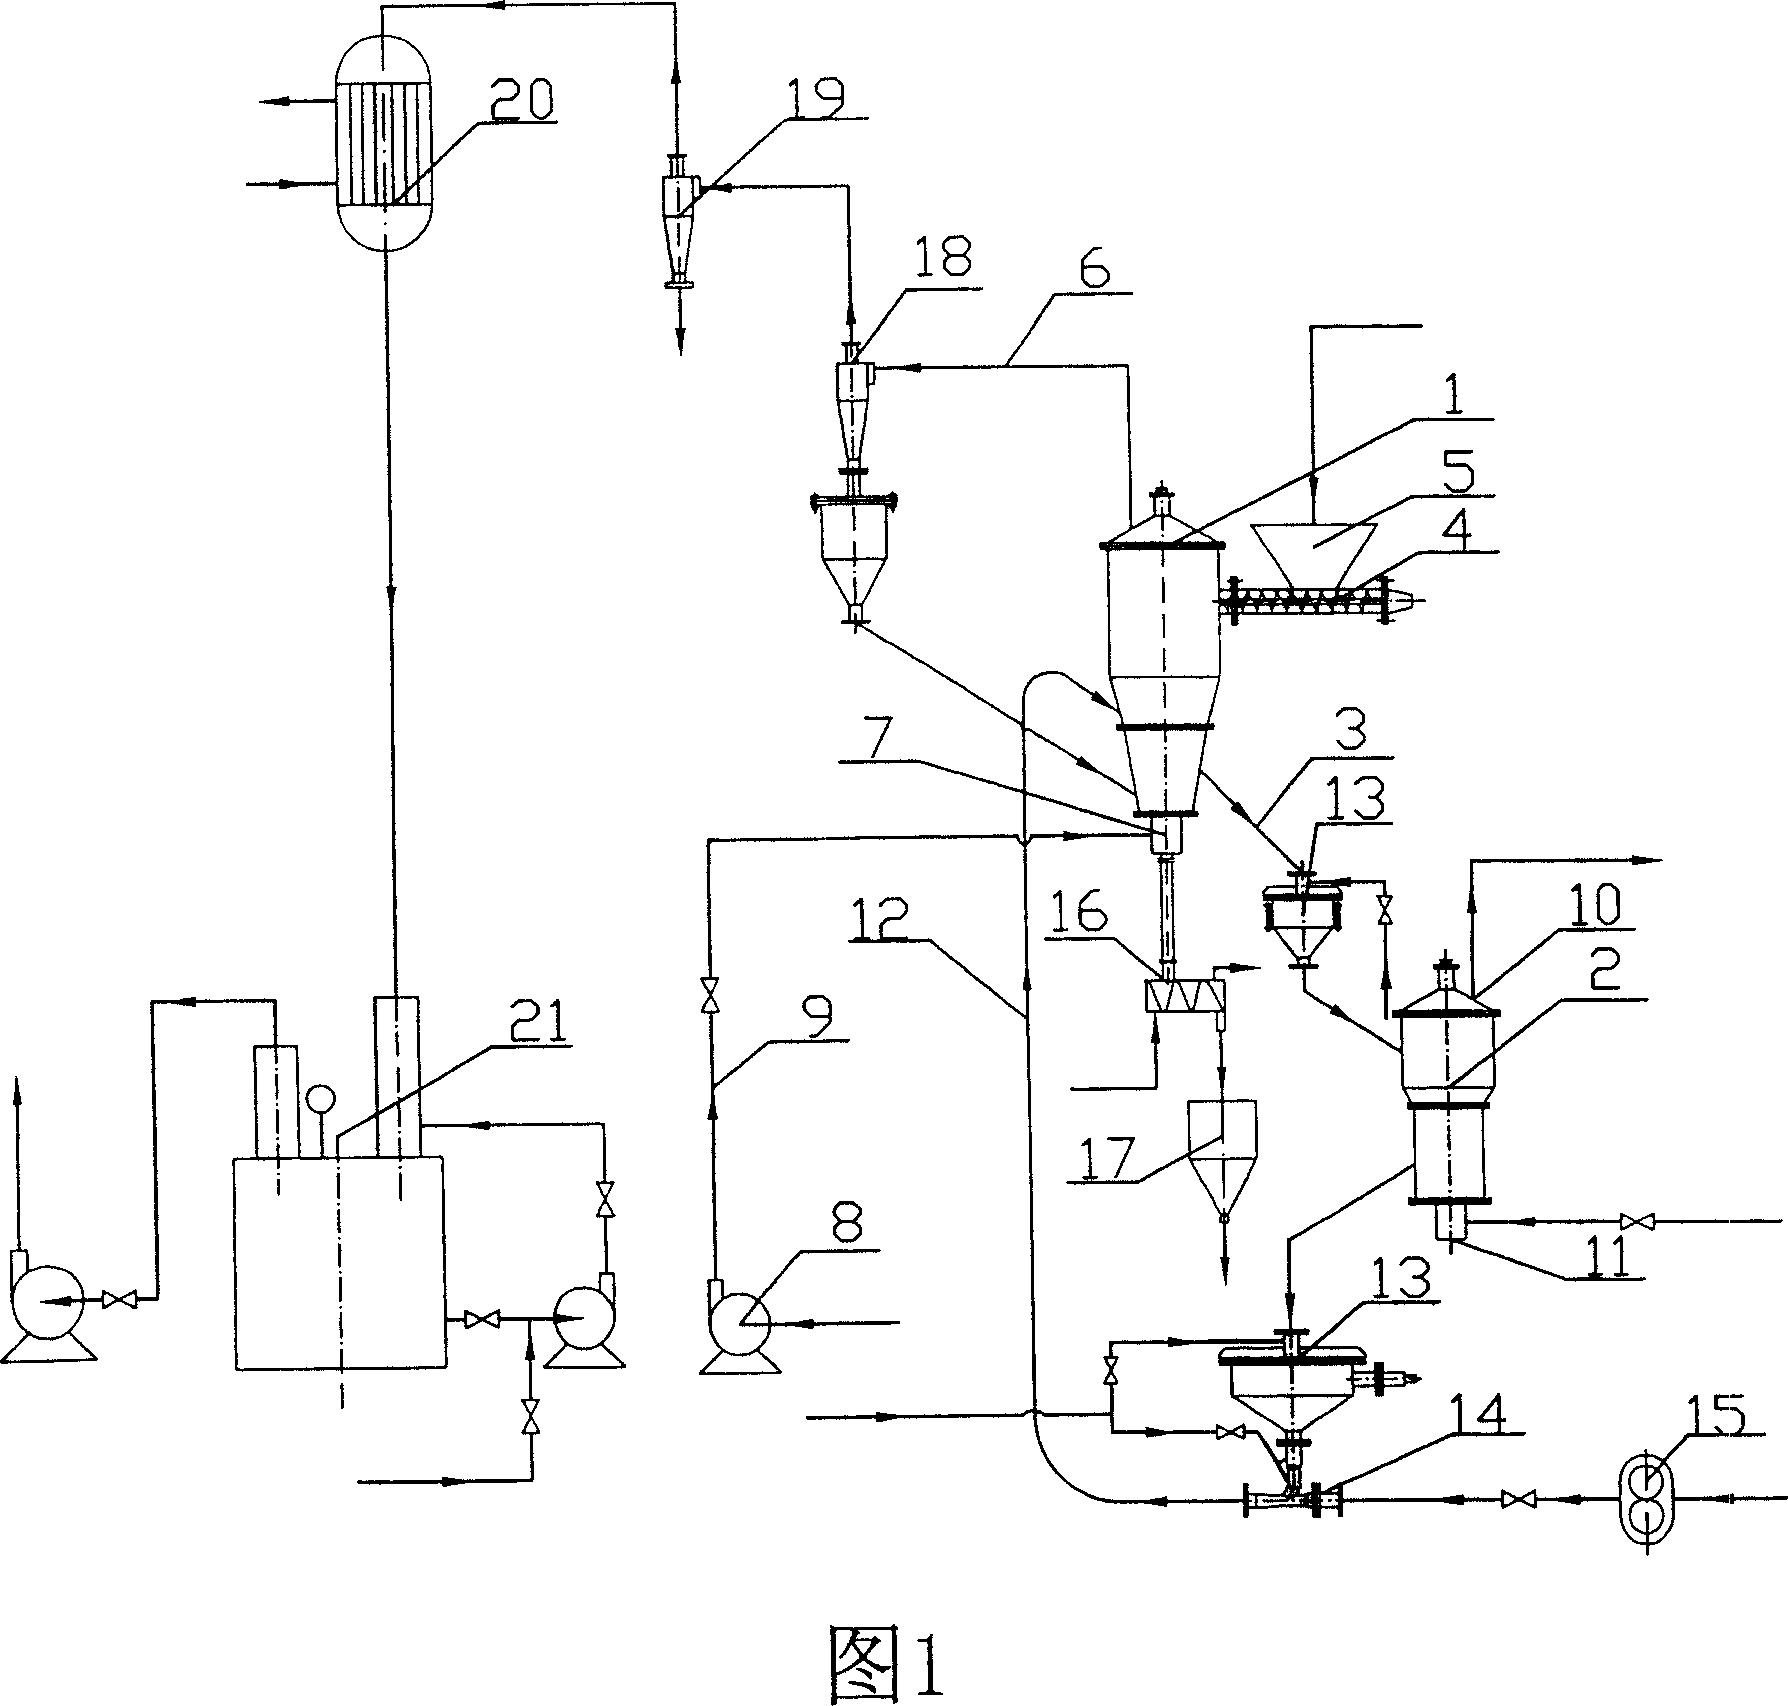 Carbon bisulfide production process and equipment